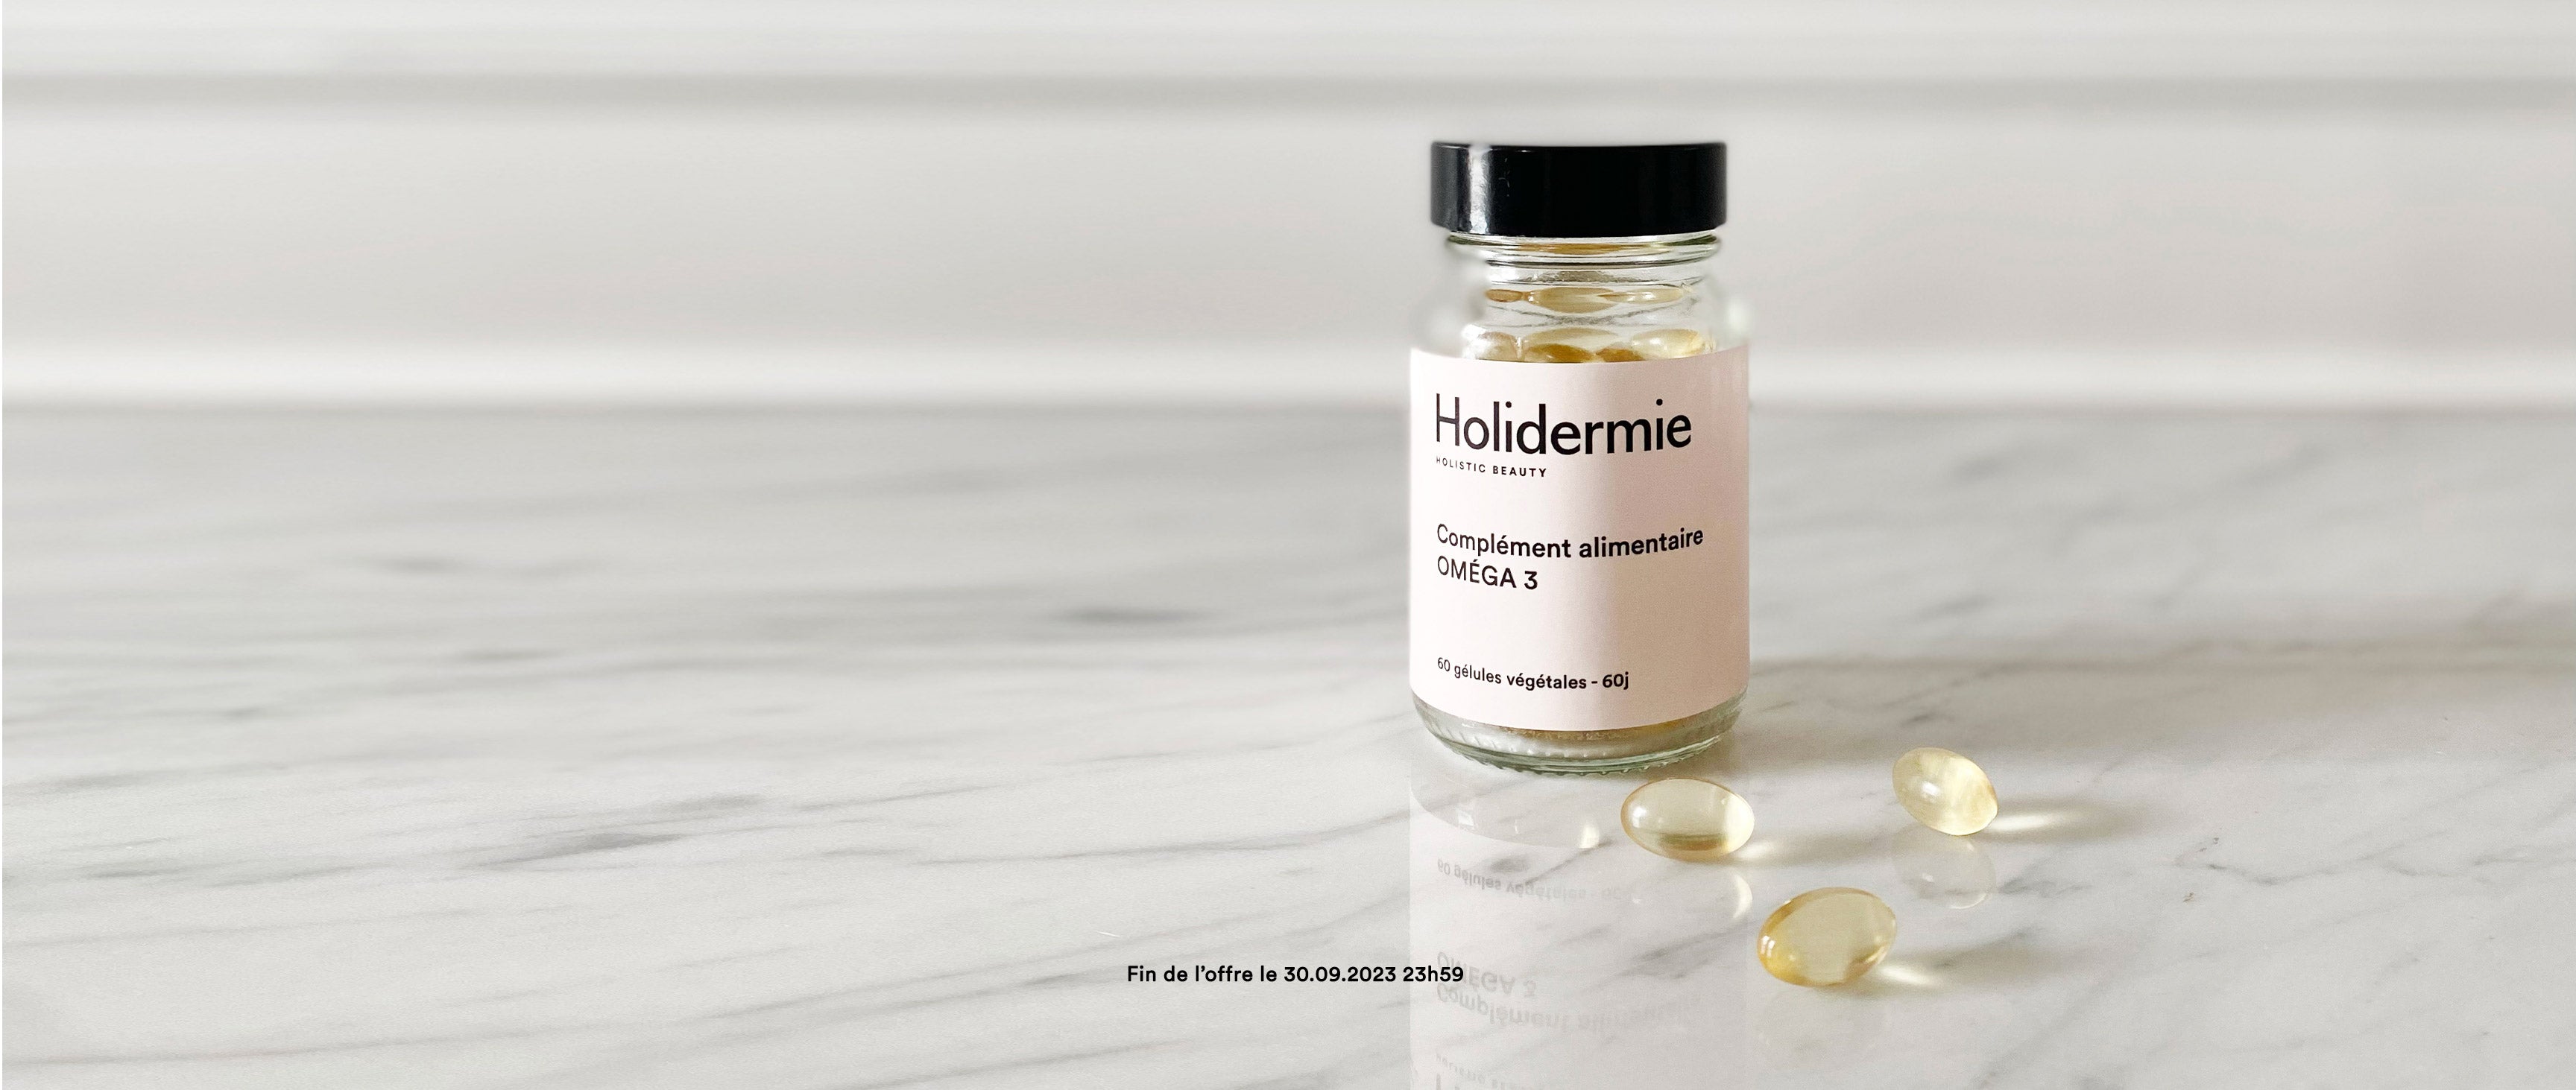 holidermie-holidermie-reinvents-beauty-inside-amp-out-cosmetic-care-food-supplements-and-self-massage-vegan-and-made-in-france-brand-committed-to-women